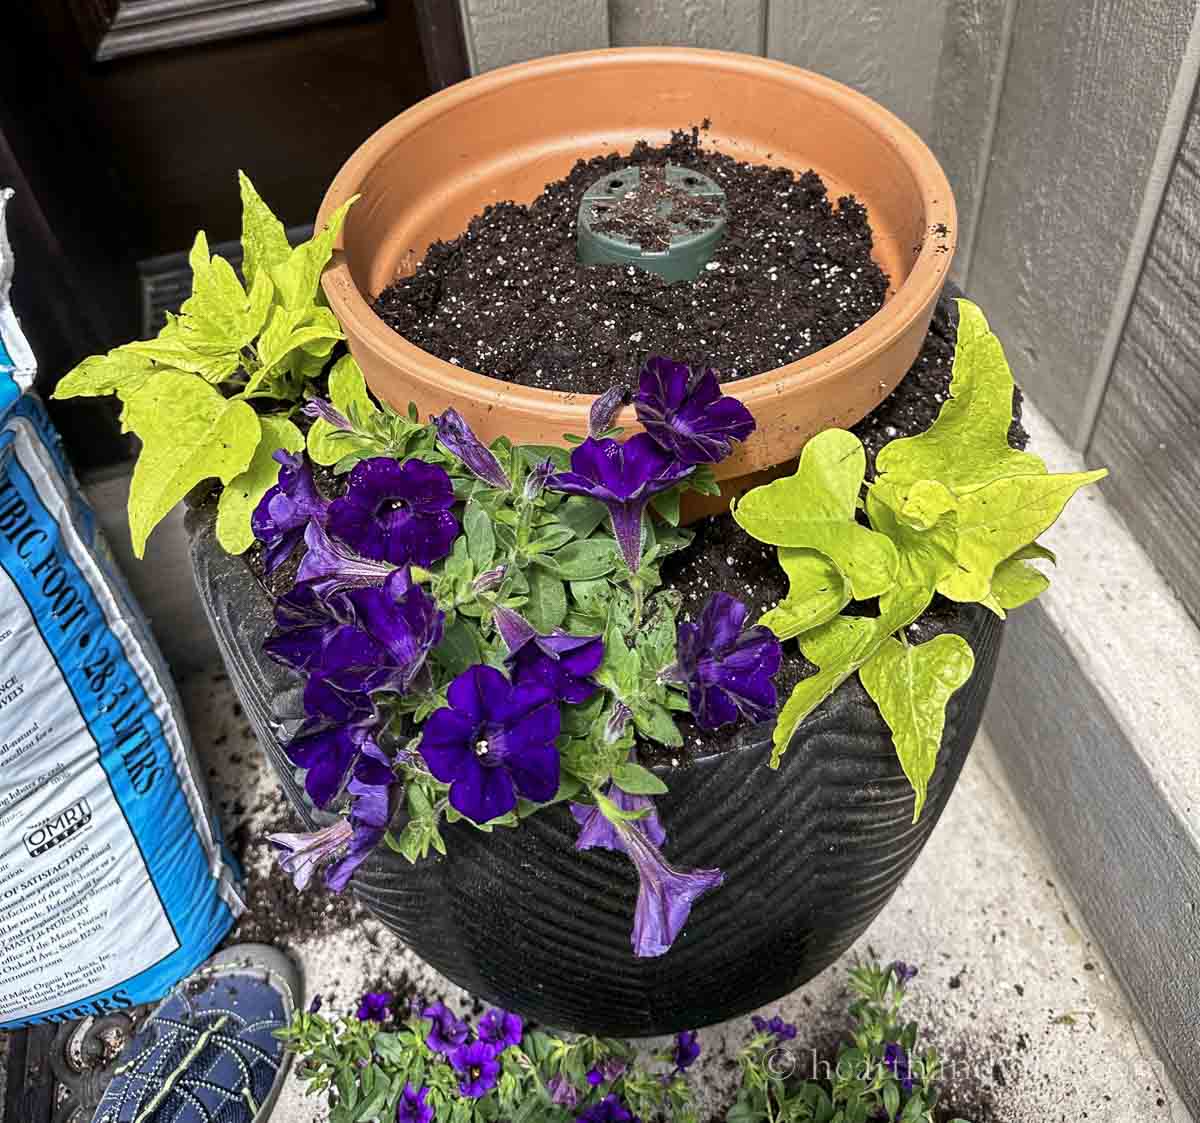 Two chartreuse sweet potato vine plants with a dark purple petunia between in a large pot with a clay pot behind.